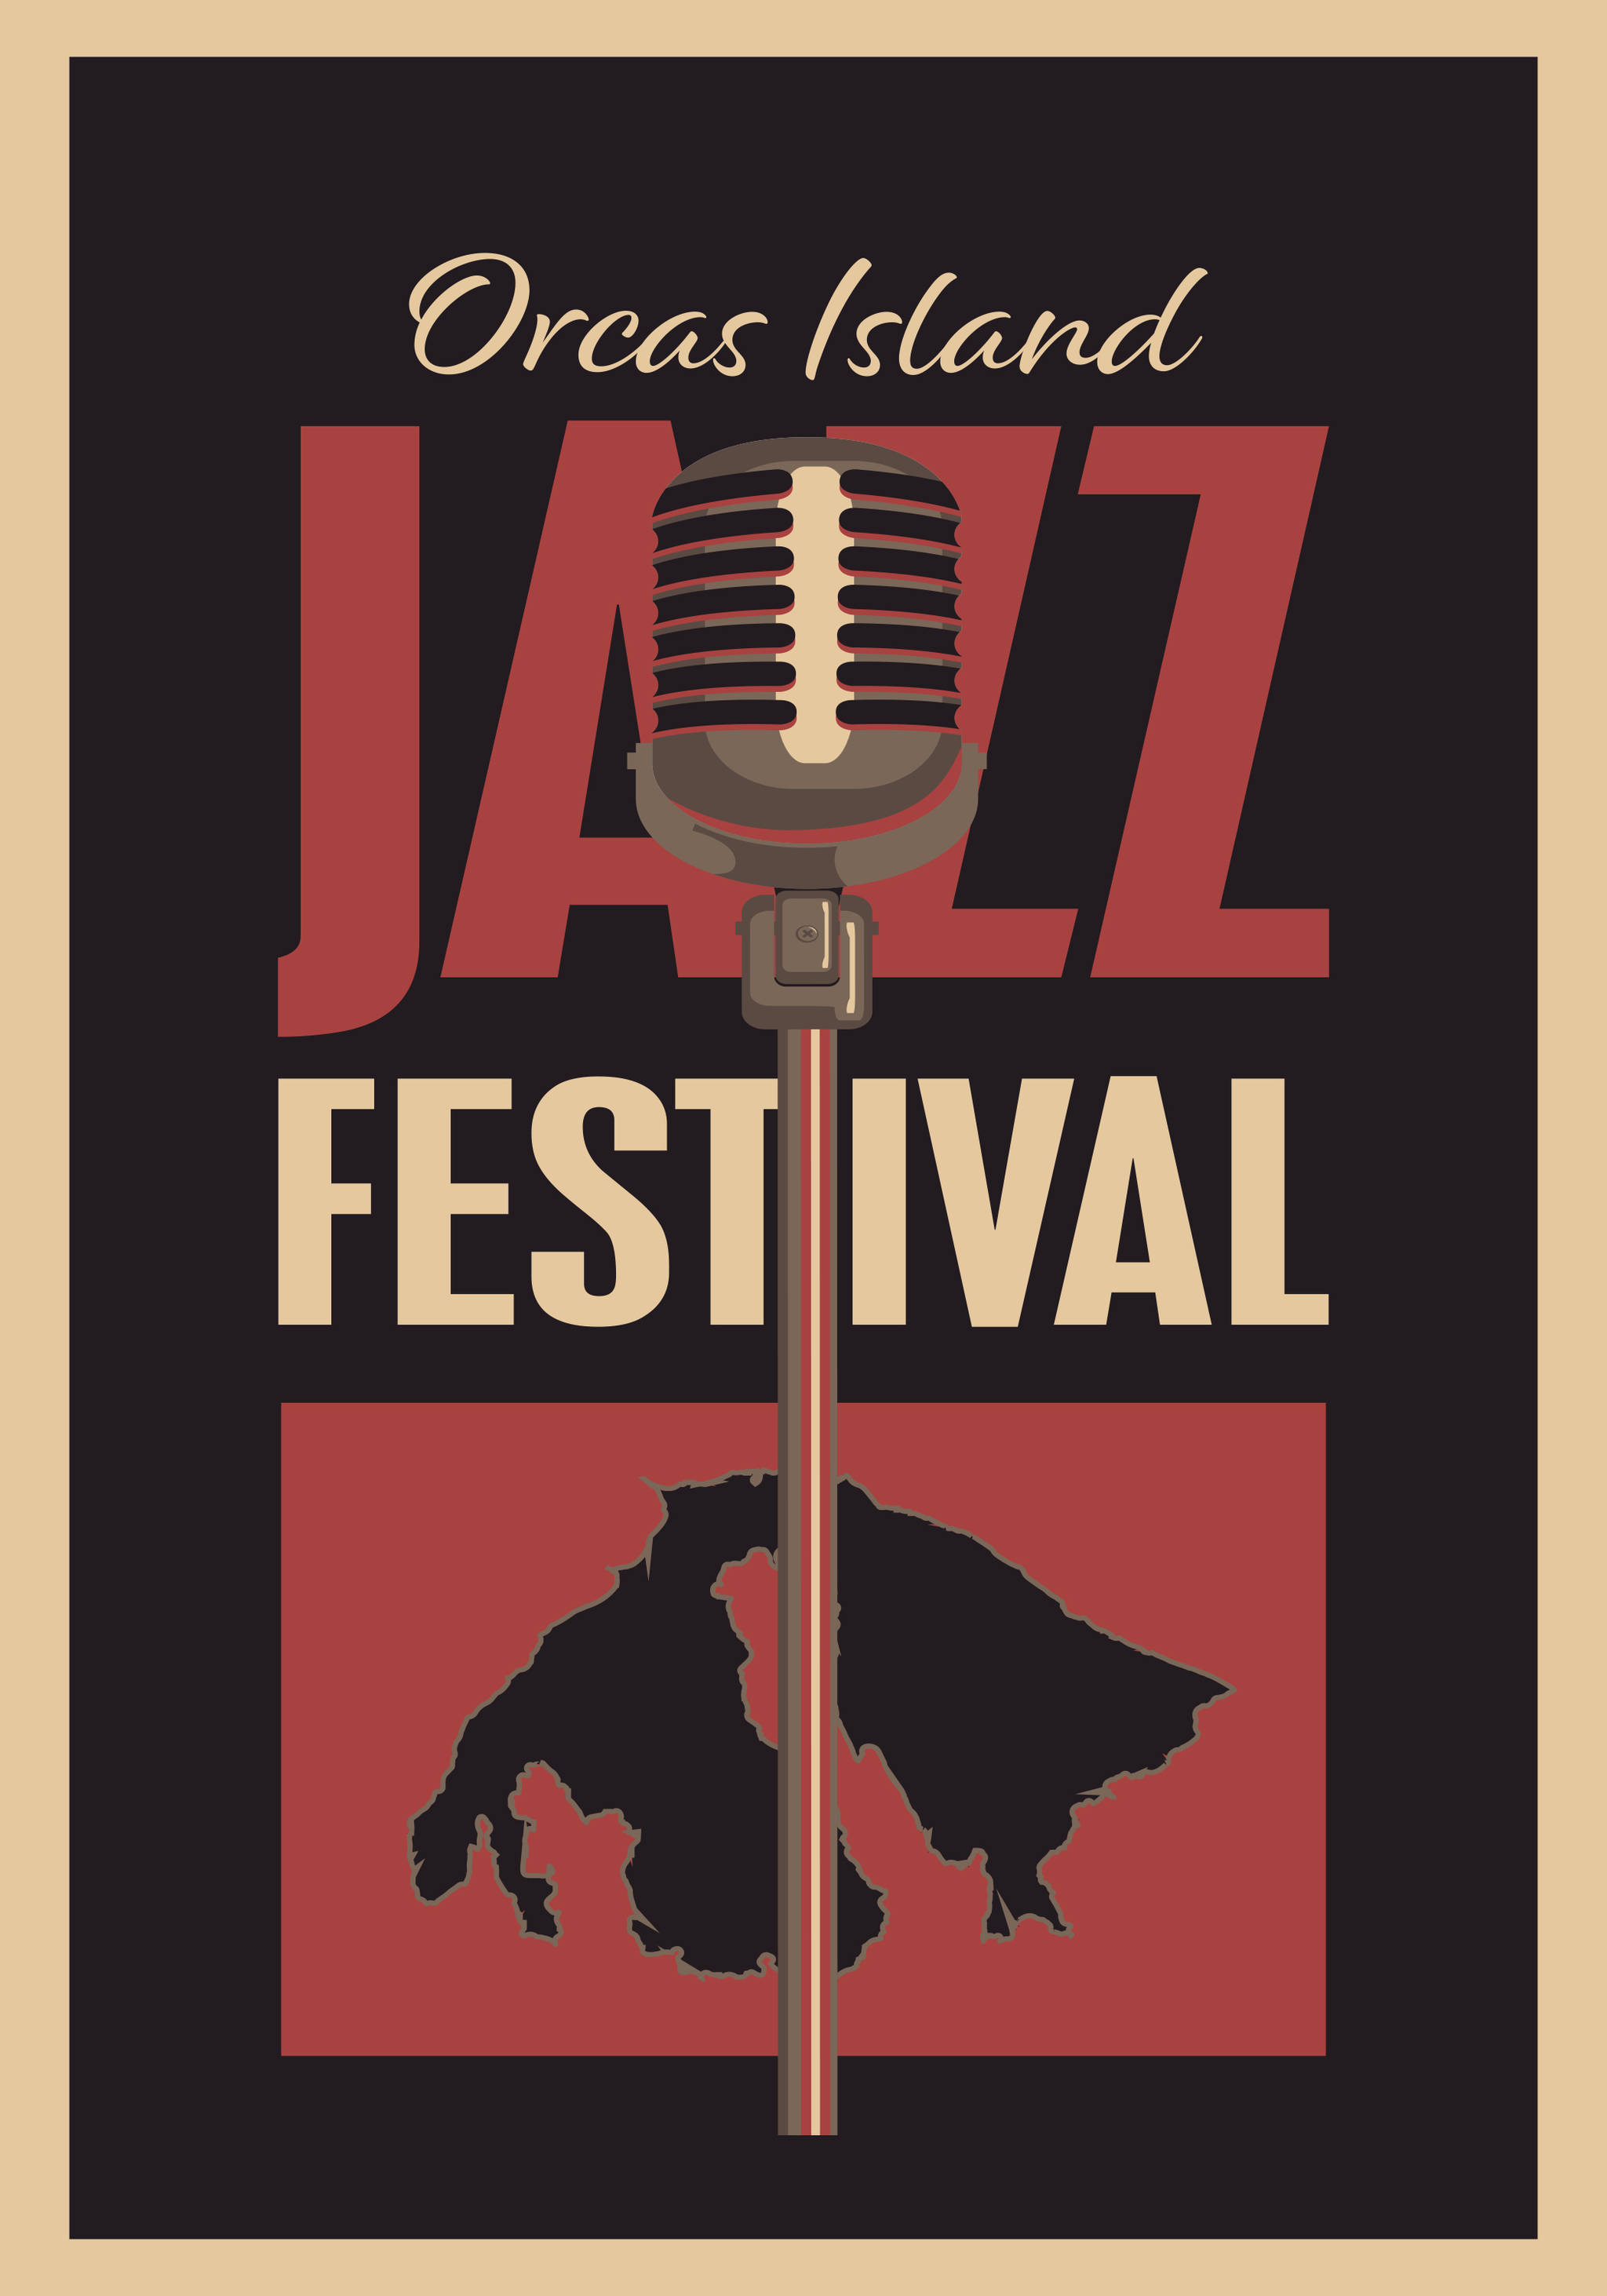 Orcas Island Jazz Festival and Student Workshop Labor Day Weekend